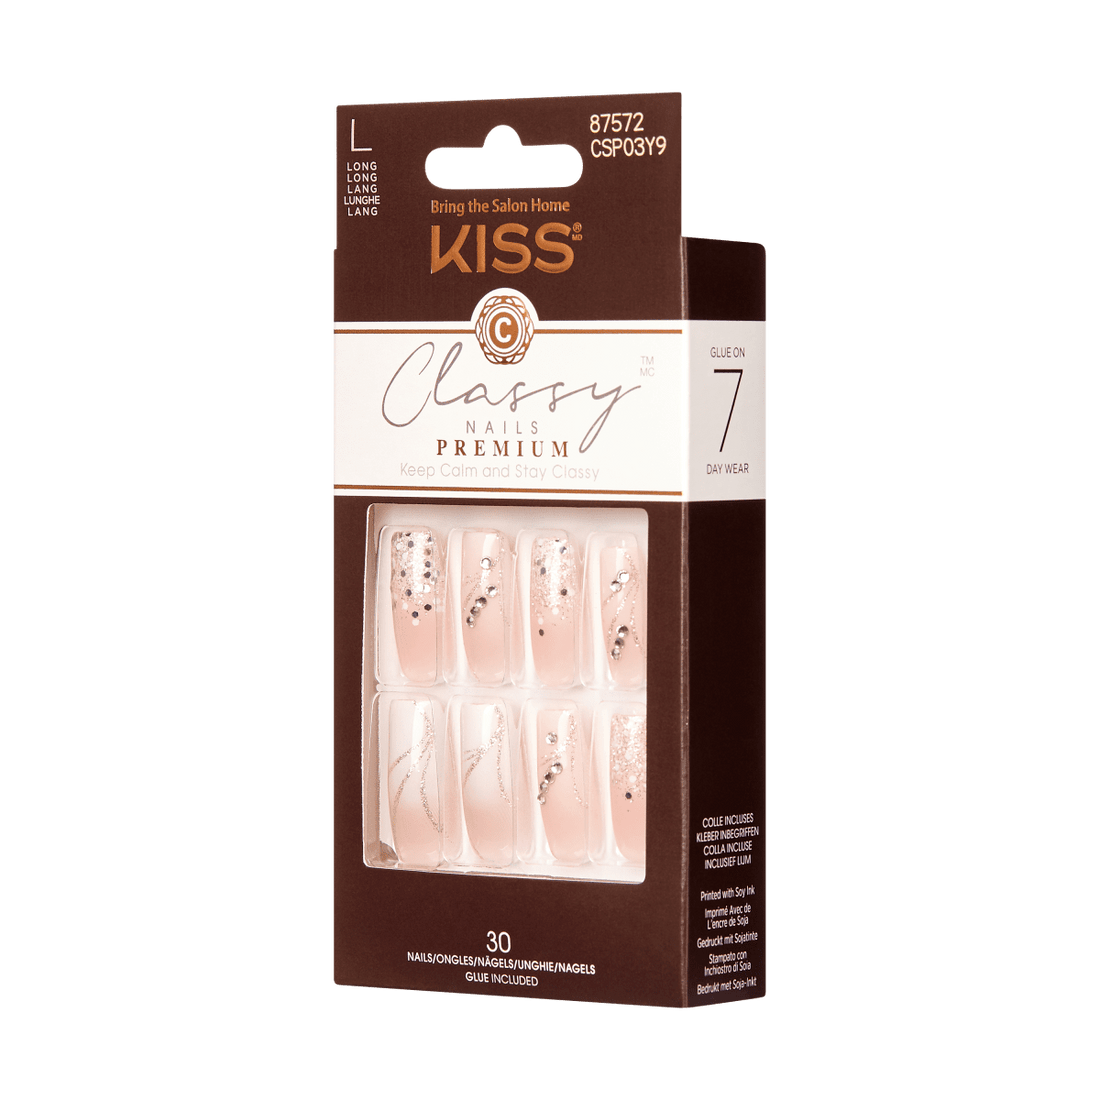 KISS Classy Nails Premium, Press-On Nails, Crystal Crown, Beige, Long Square, 30ct